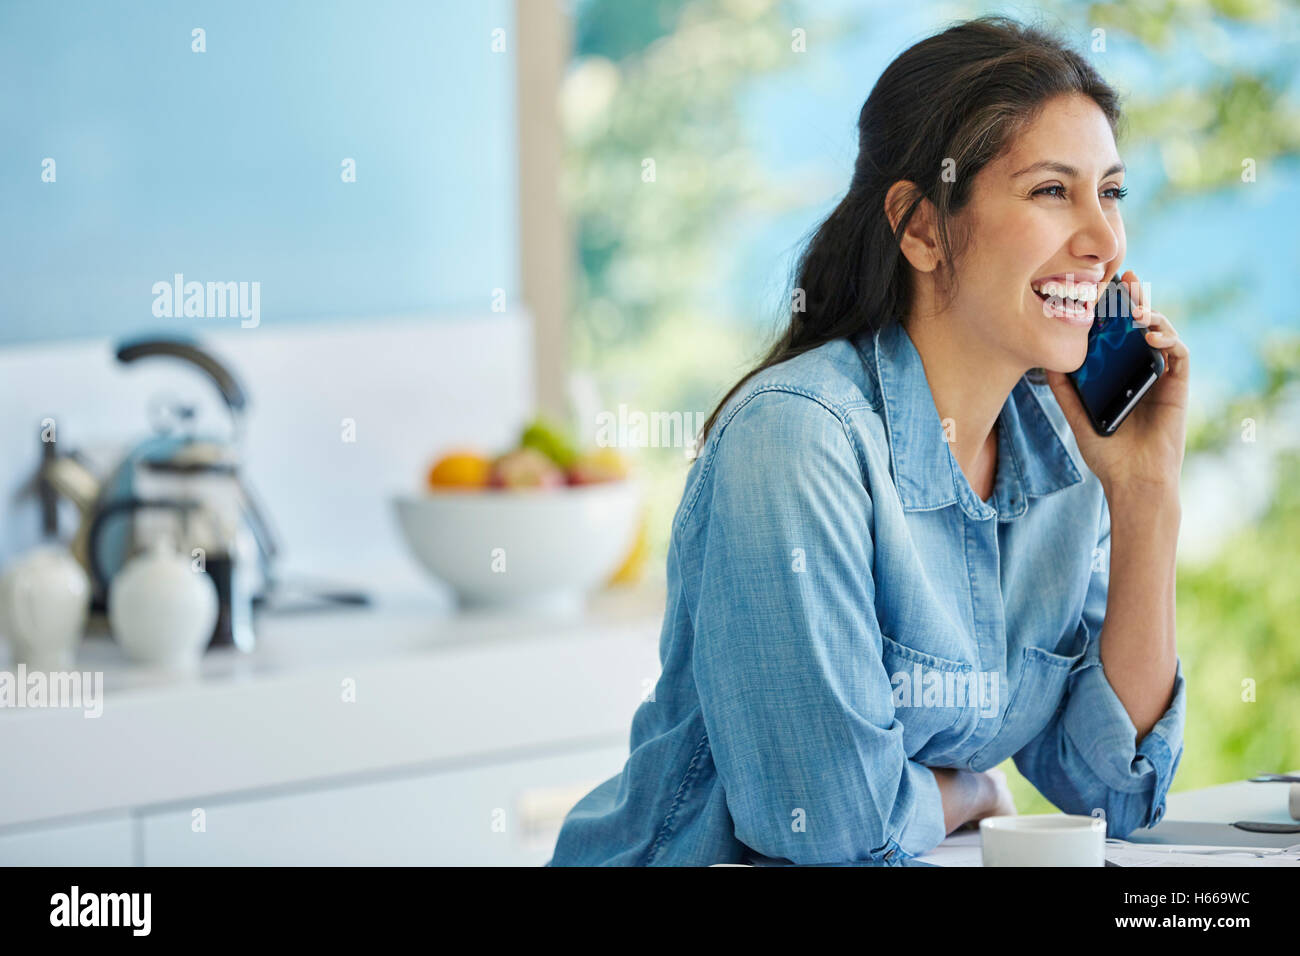 Smiling woman talking on cell phone in kitchen Stock Photo